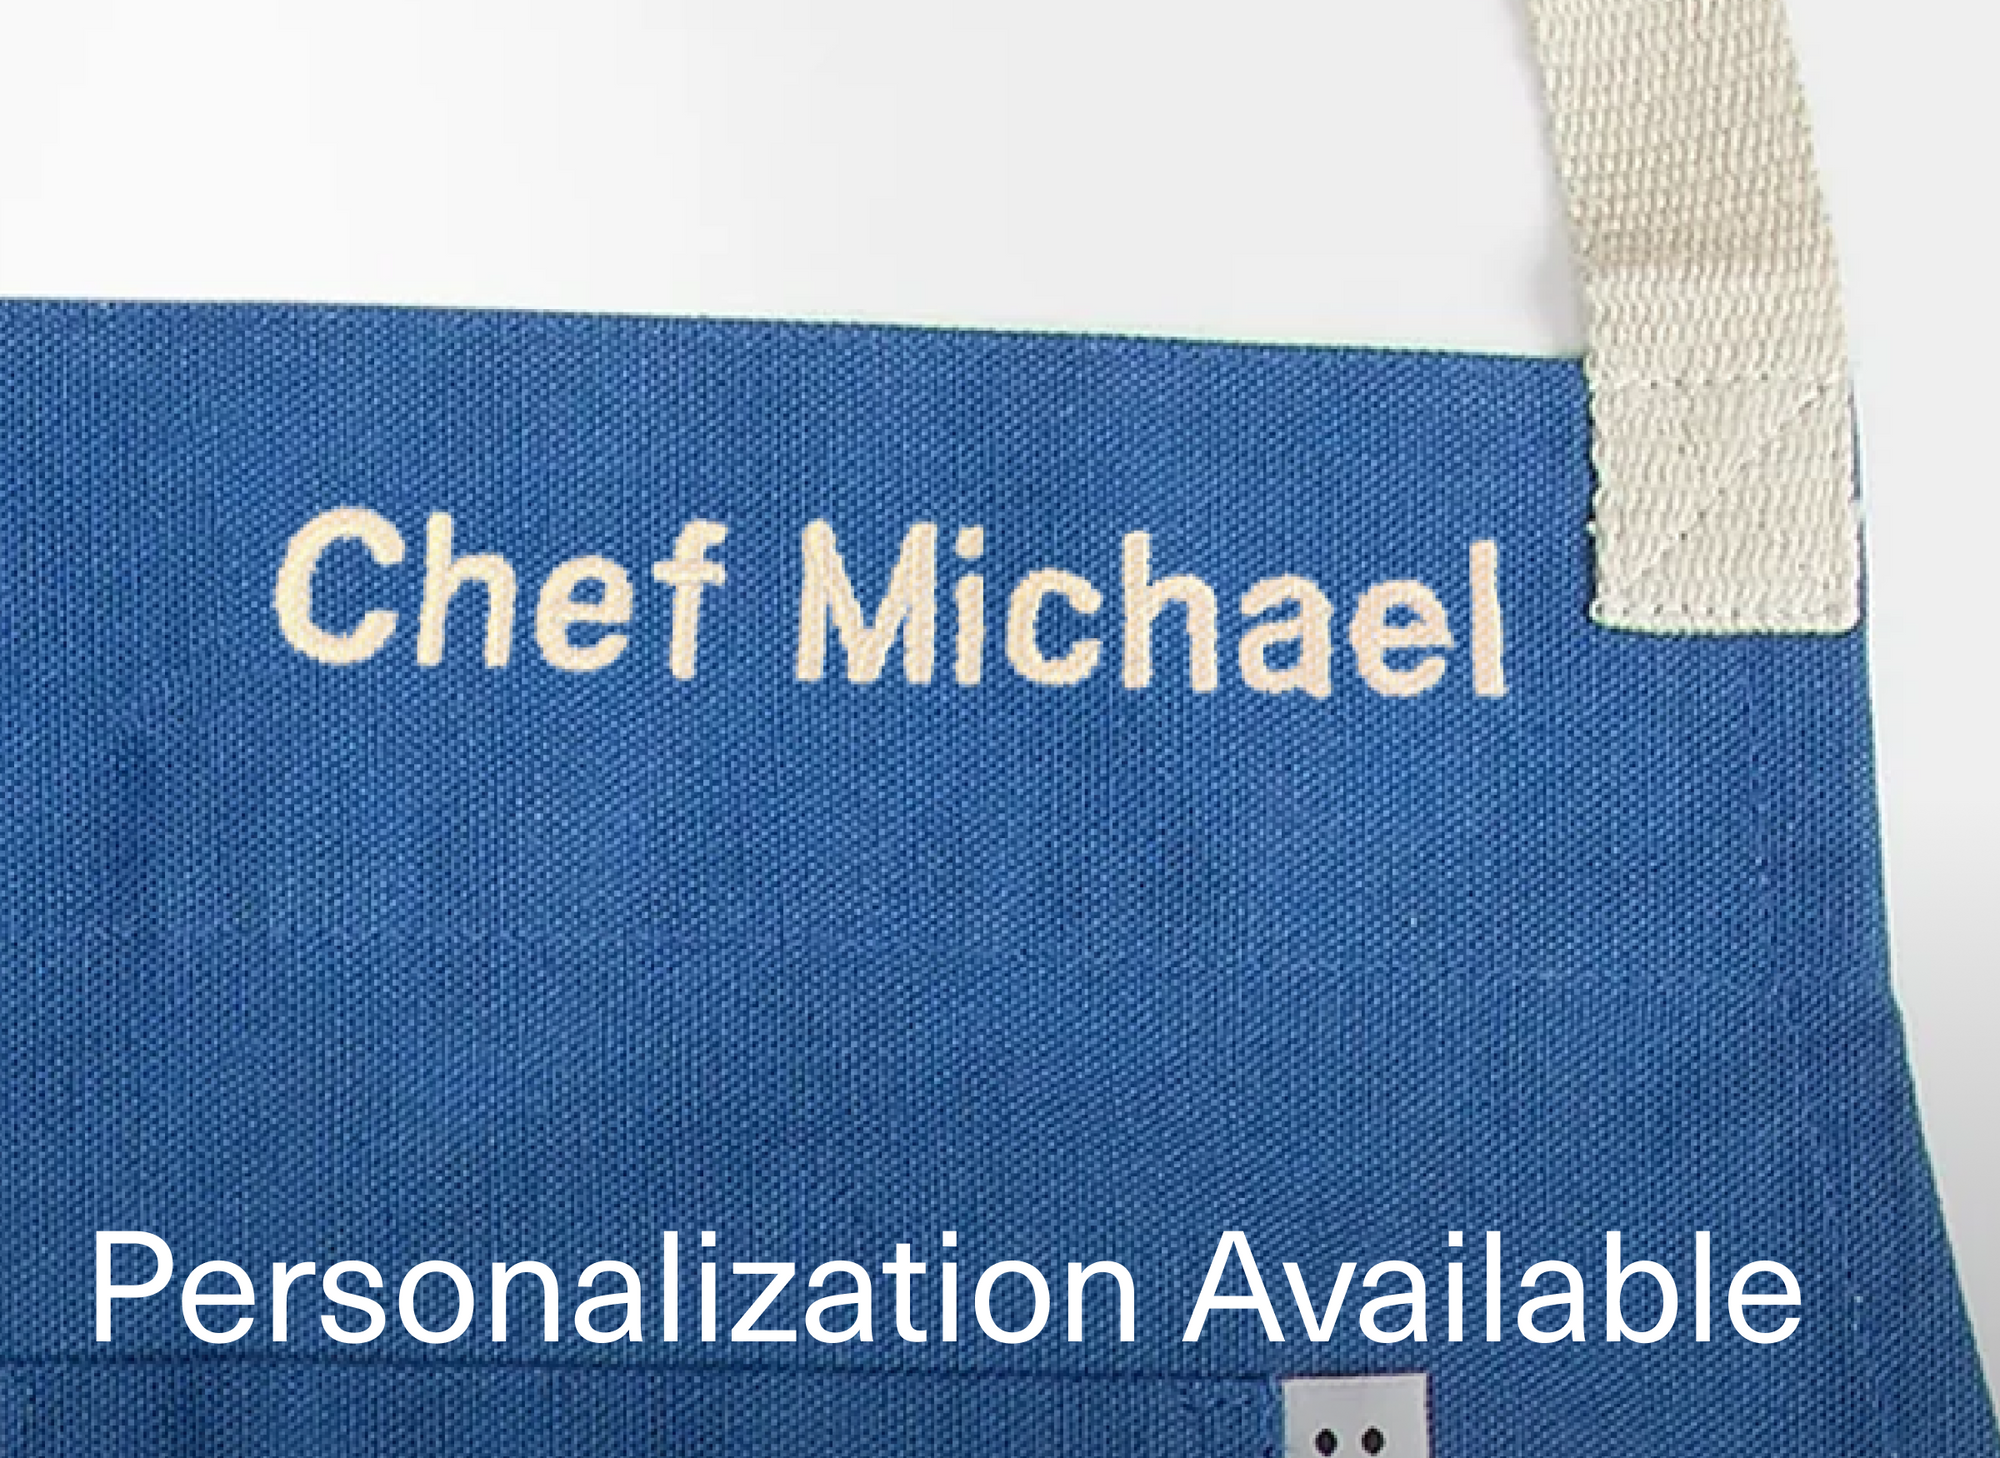 The Misen Apron can be personalized with custom embroidery for an additional fee